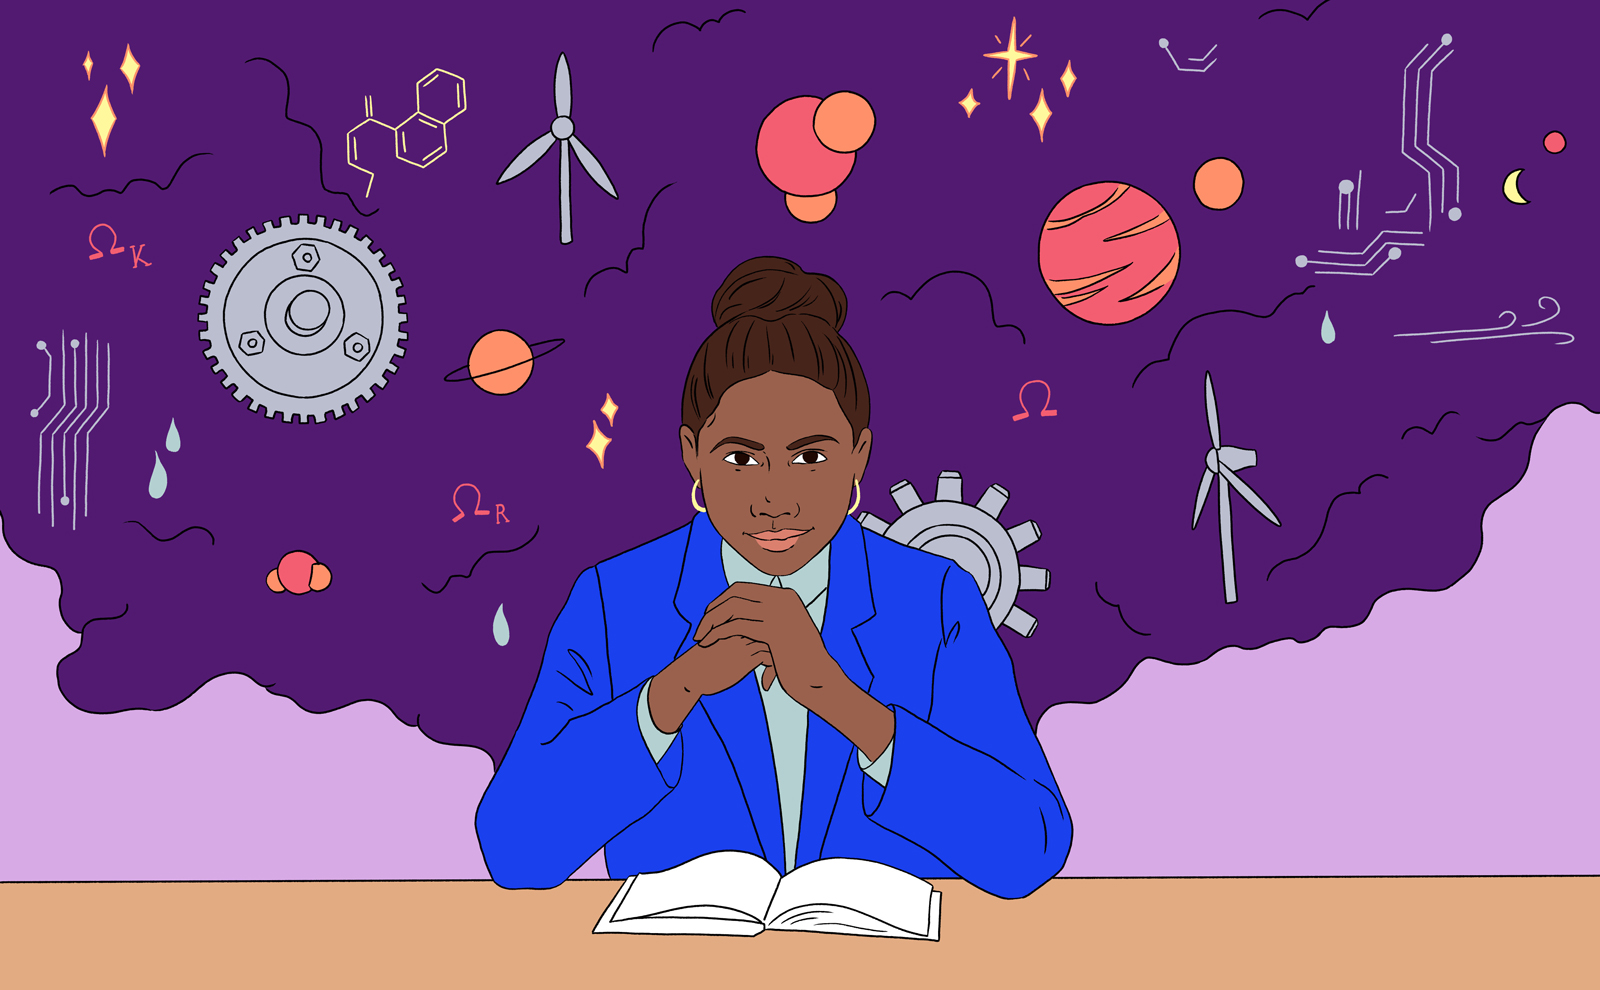 A scientist sits in front of a purple background